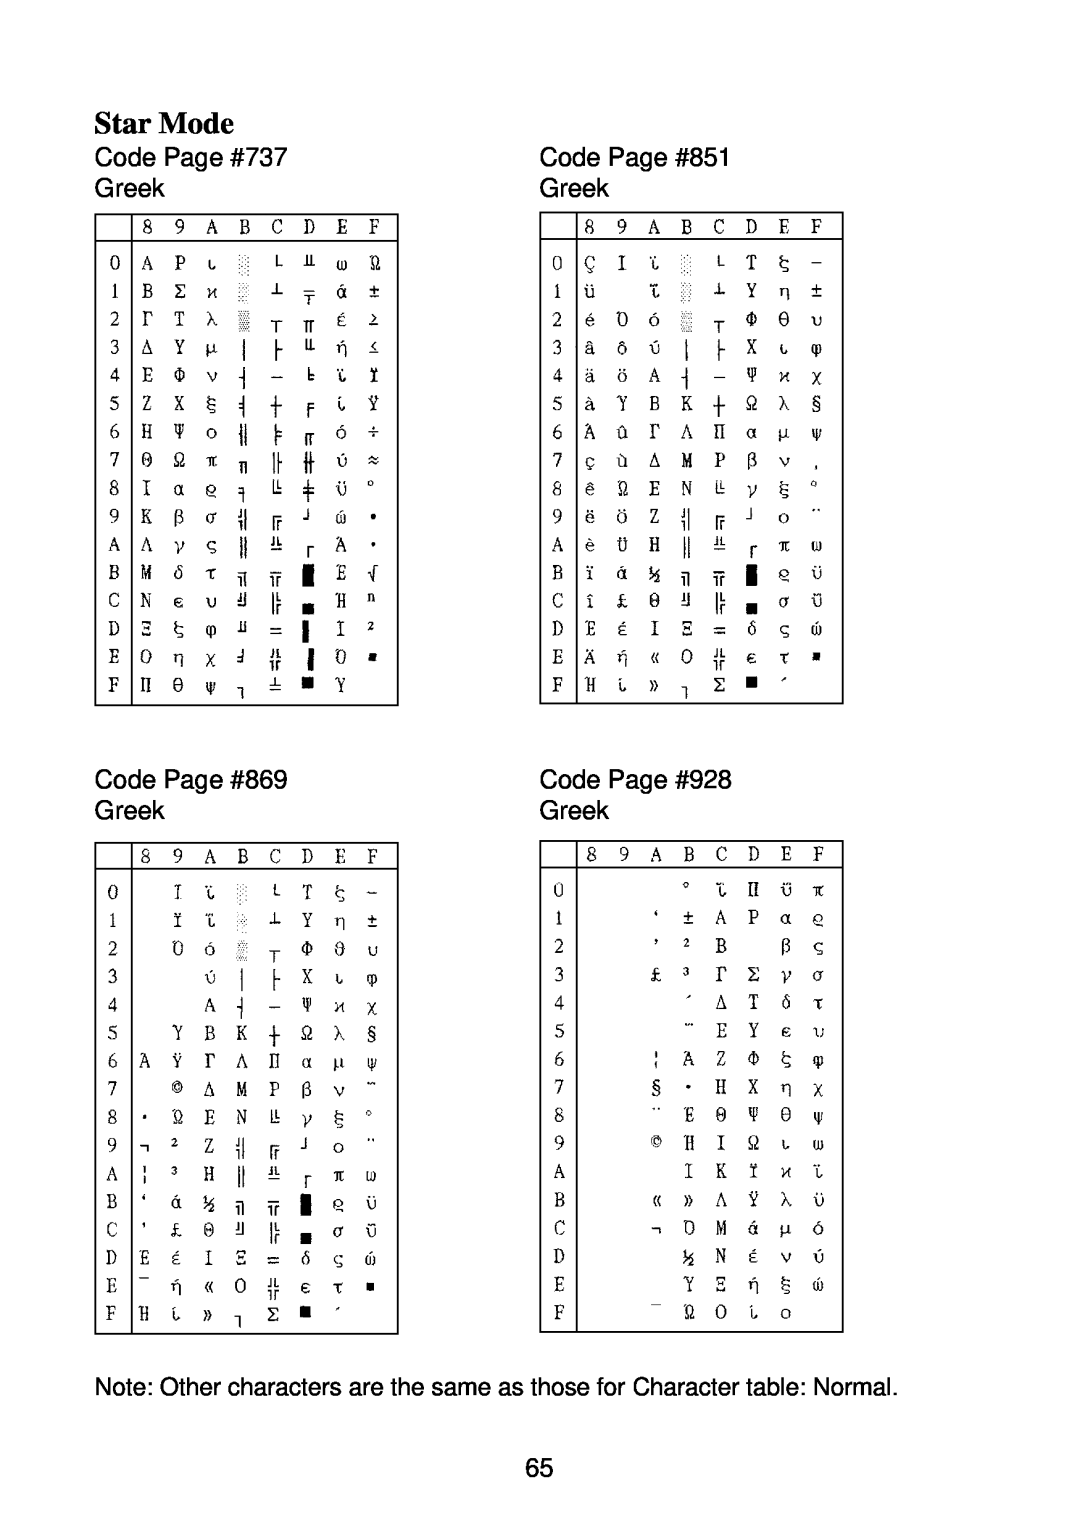 Star Micronics SP2000 Code Page #737 Greek Code Page #869 Greek, Code Page #851 Greek Code Page #928 Greek, Star Mode 